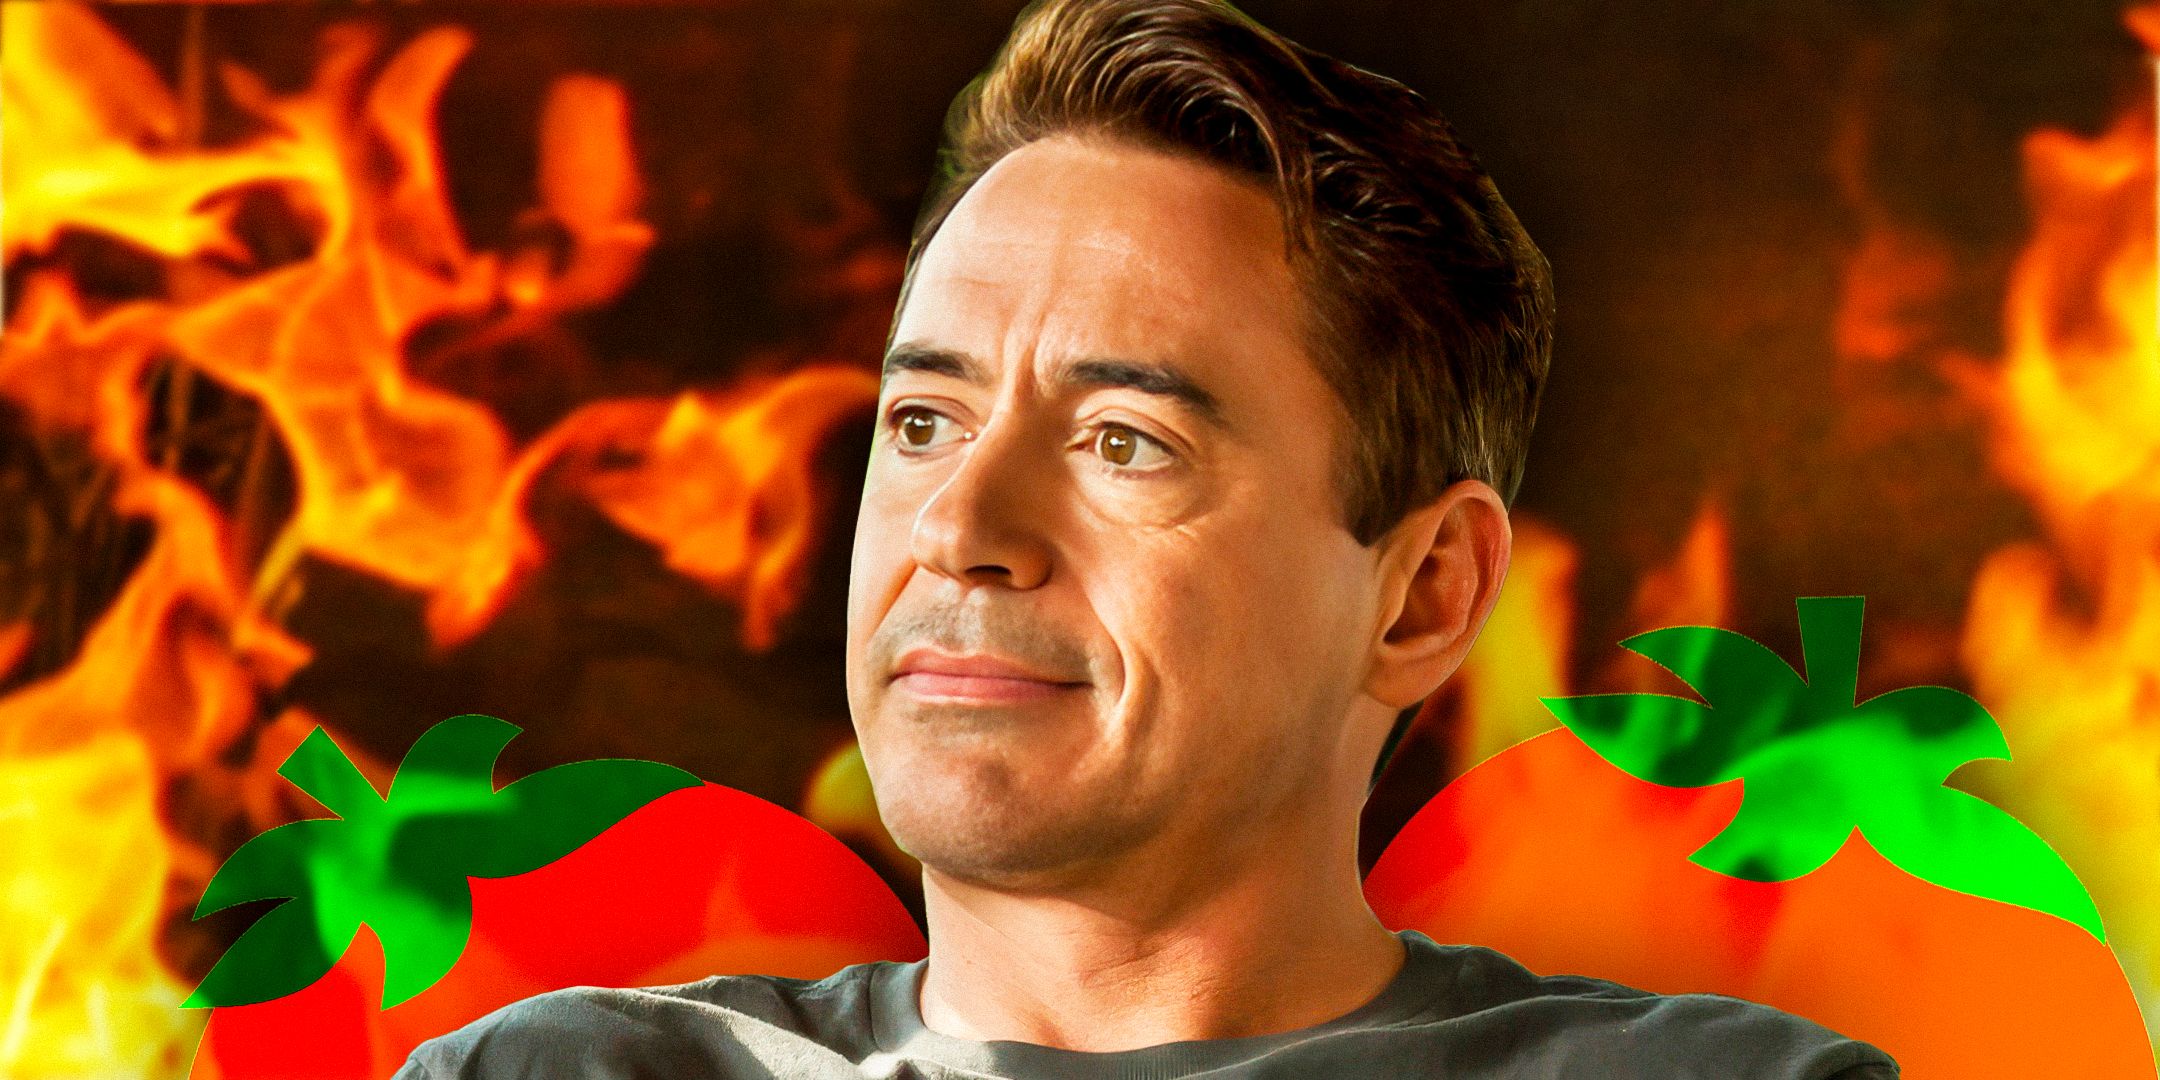 Robert Downey Jr’s New Show Is Even Better Thanks To Perfect Callback To His 82% RT Comedy Role From 16 Years Ago